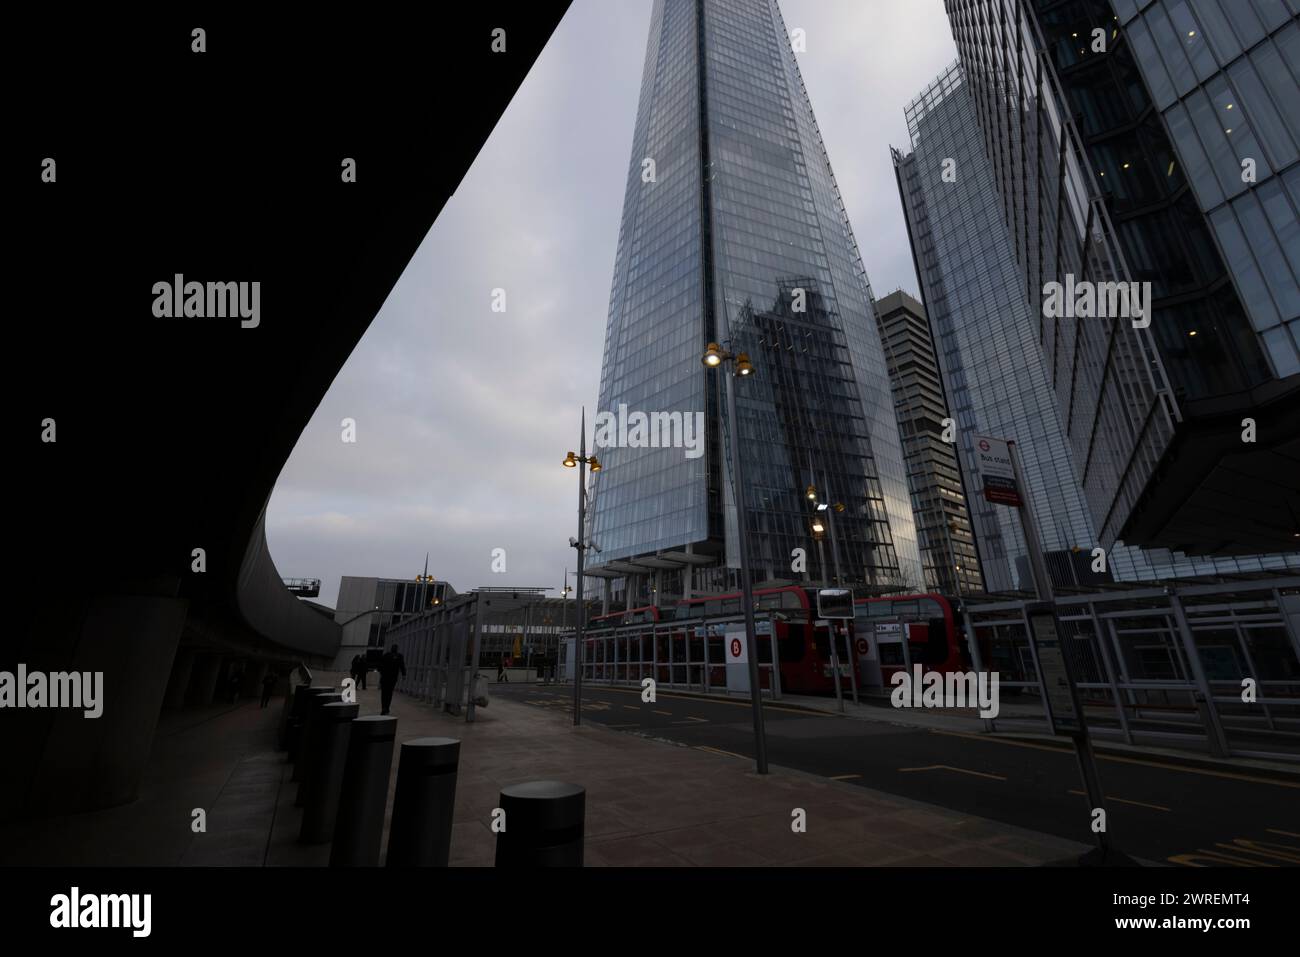 The area around London Bridge station, in the heart of City of London, England, United Kingdom Stock Photo